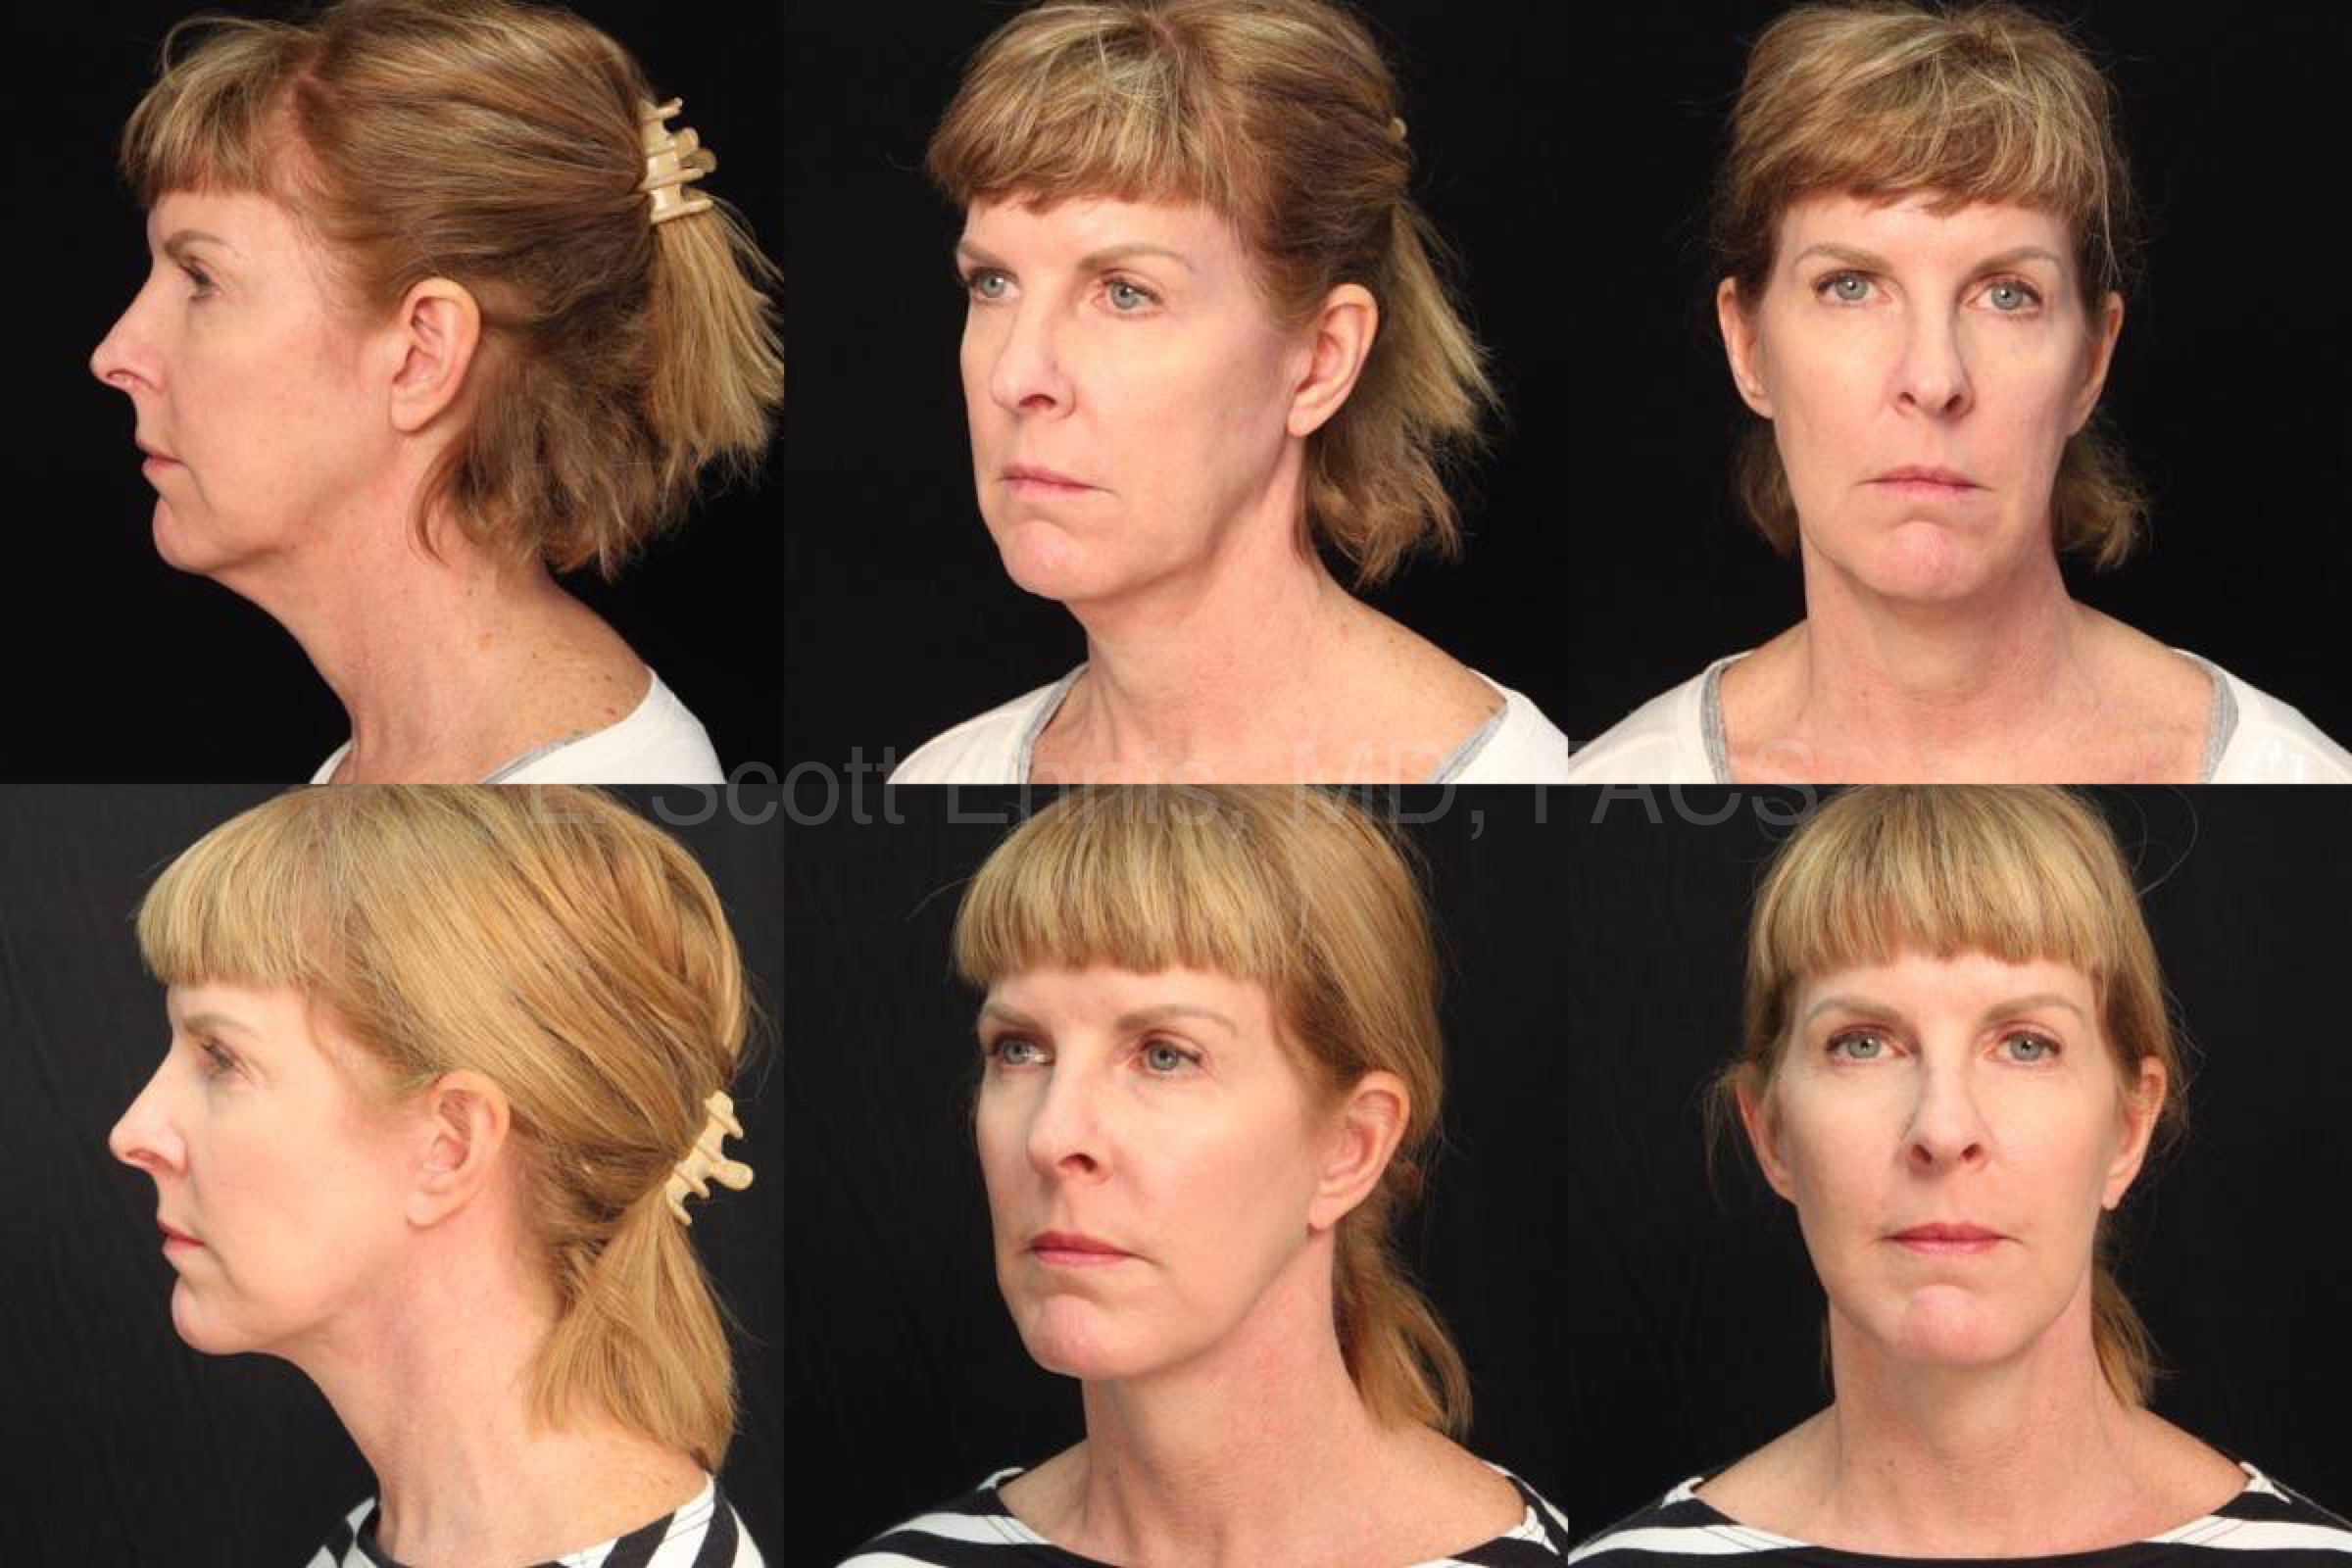 Facelift Exc of Buccal fat pads 55yof Before and After Ennis Plastic Surgery Palm Beach Boca Raton Destin Miami Fort Lauderdale